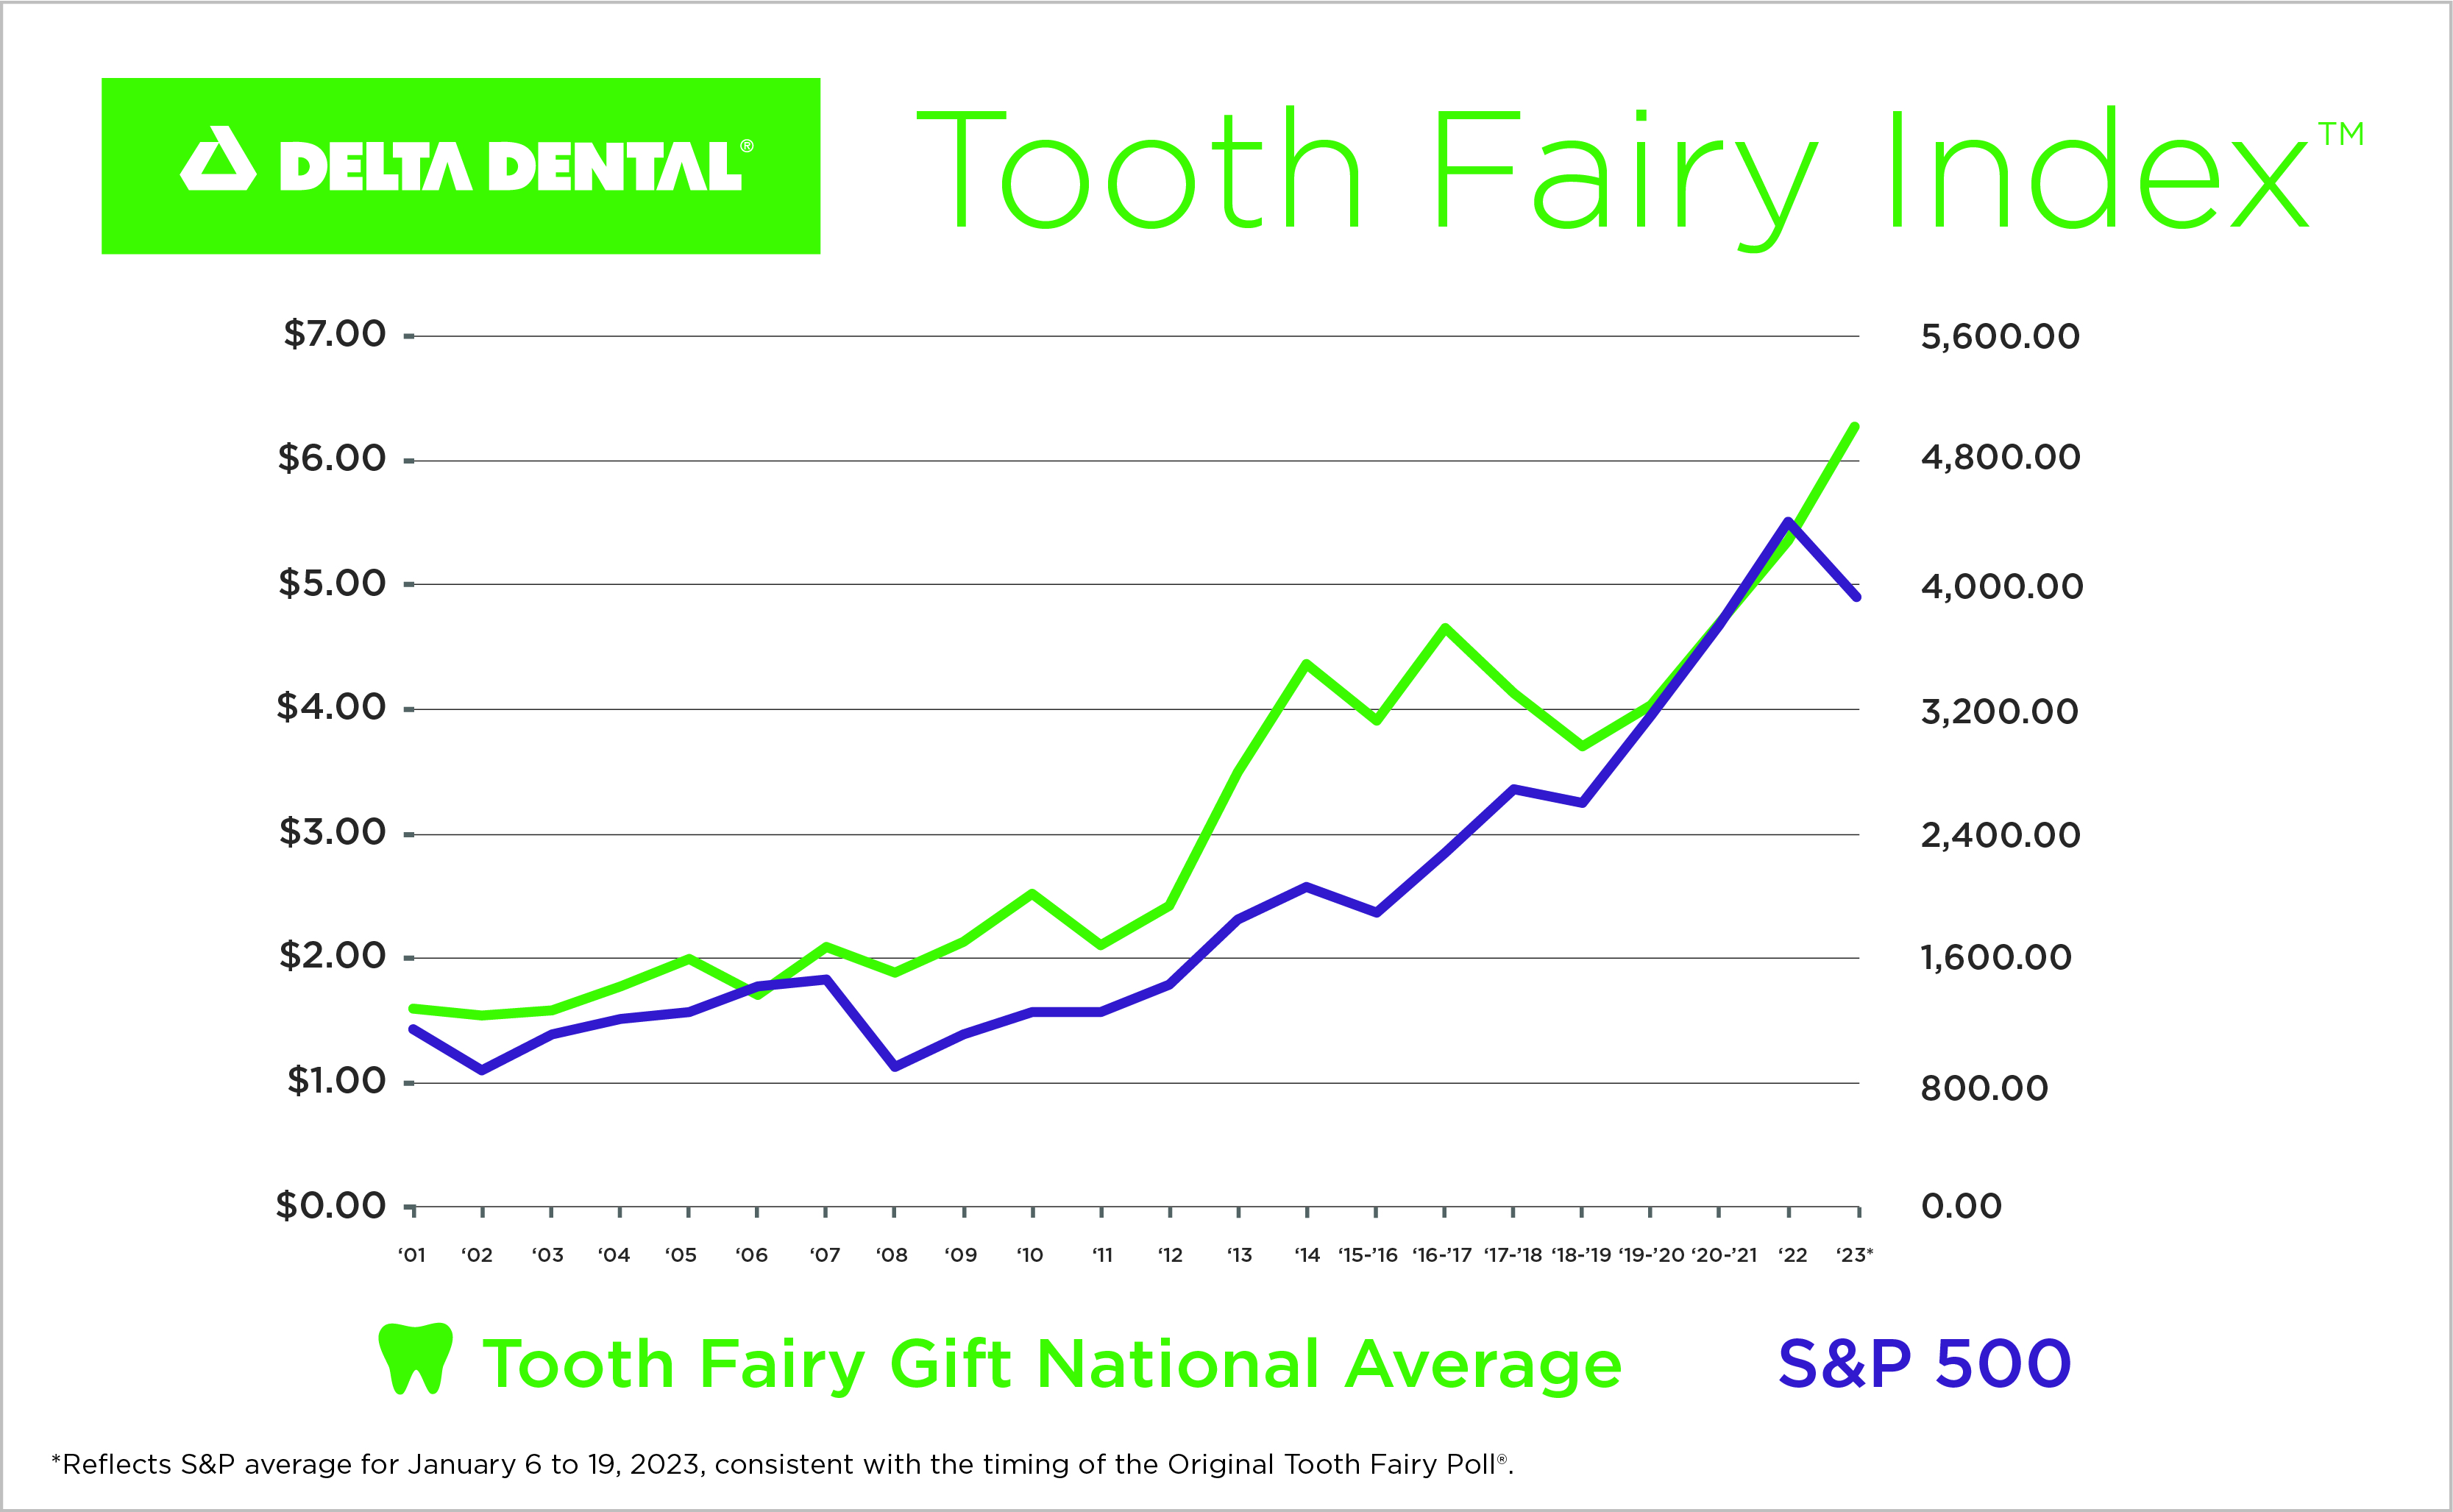 Delta Dental poll finds Tooth Fairy into most U.S. homes